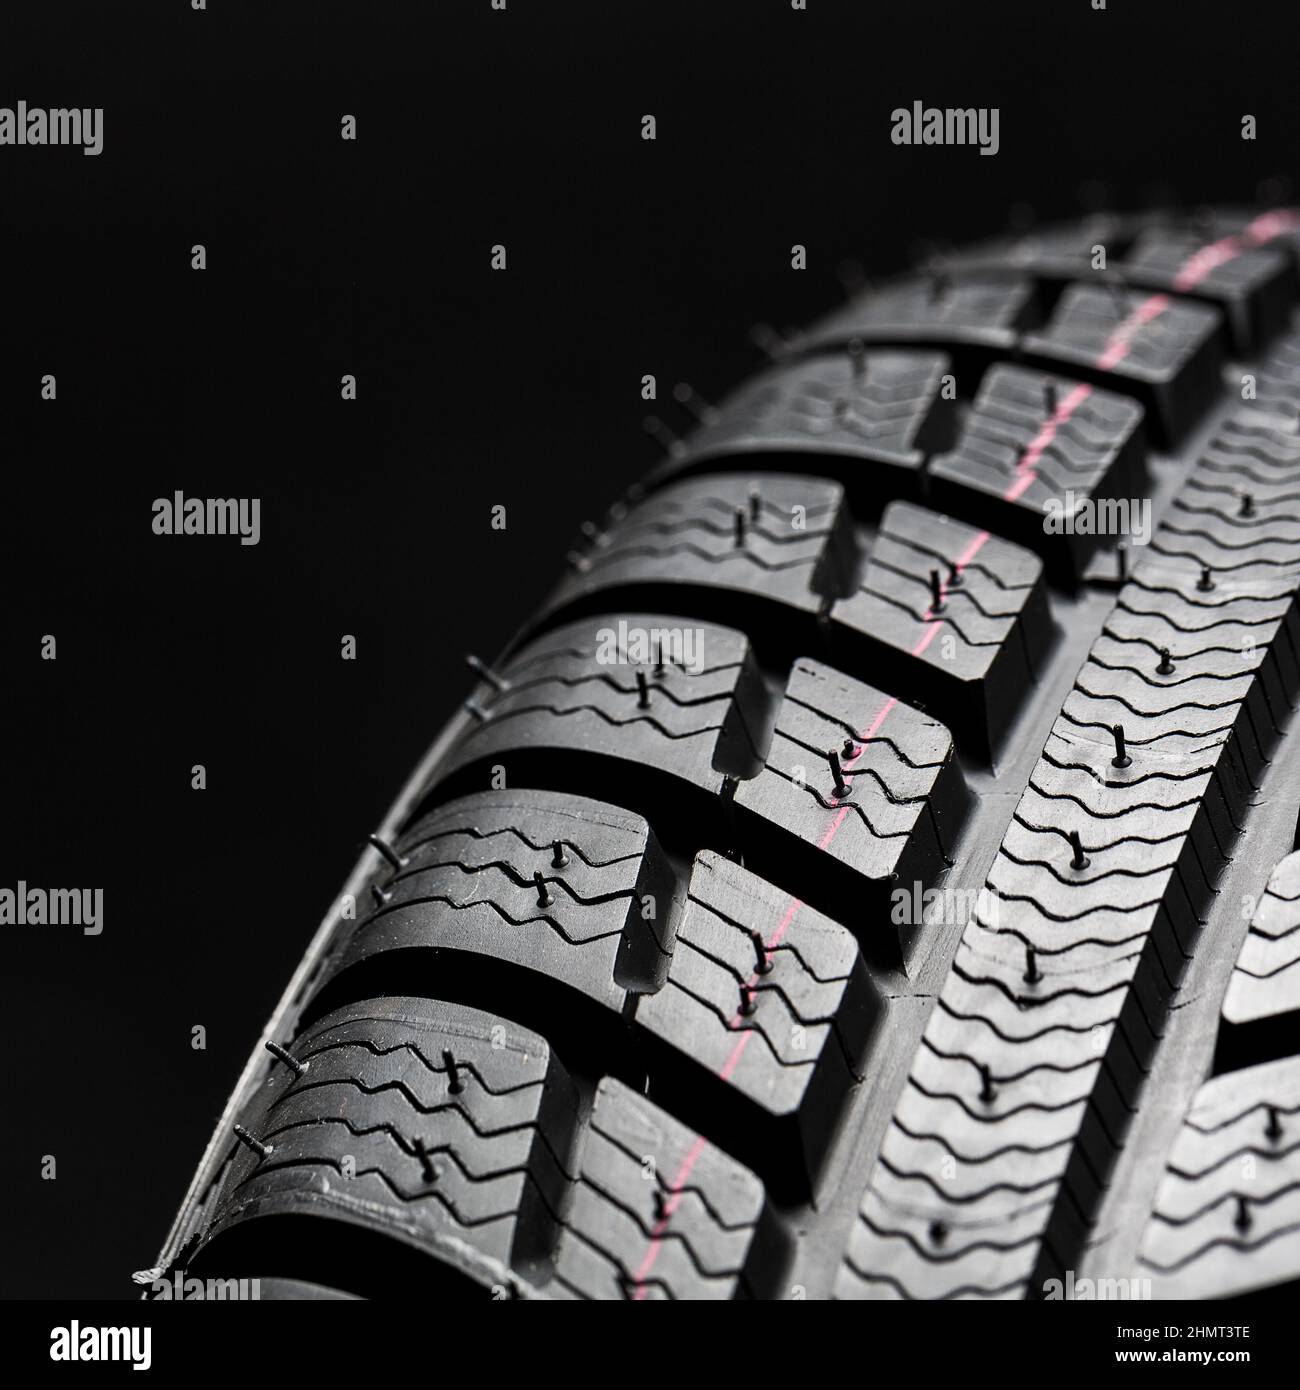 Winter Car tires close-up wheel profile structure on black background Stock Photo